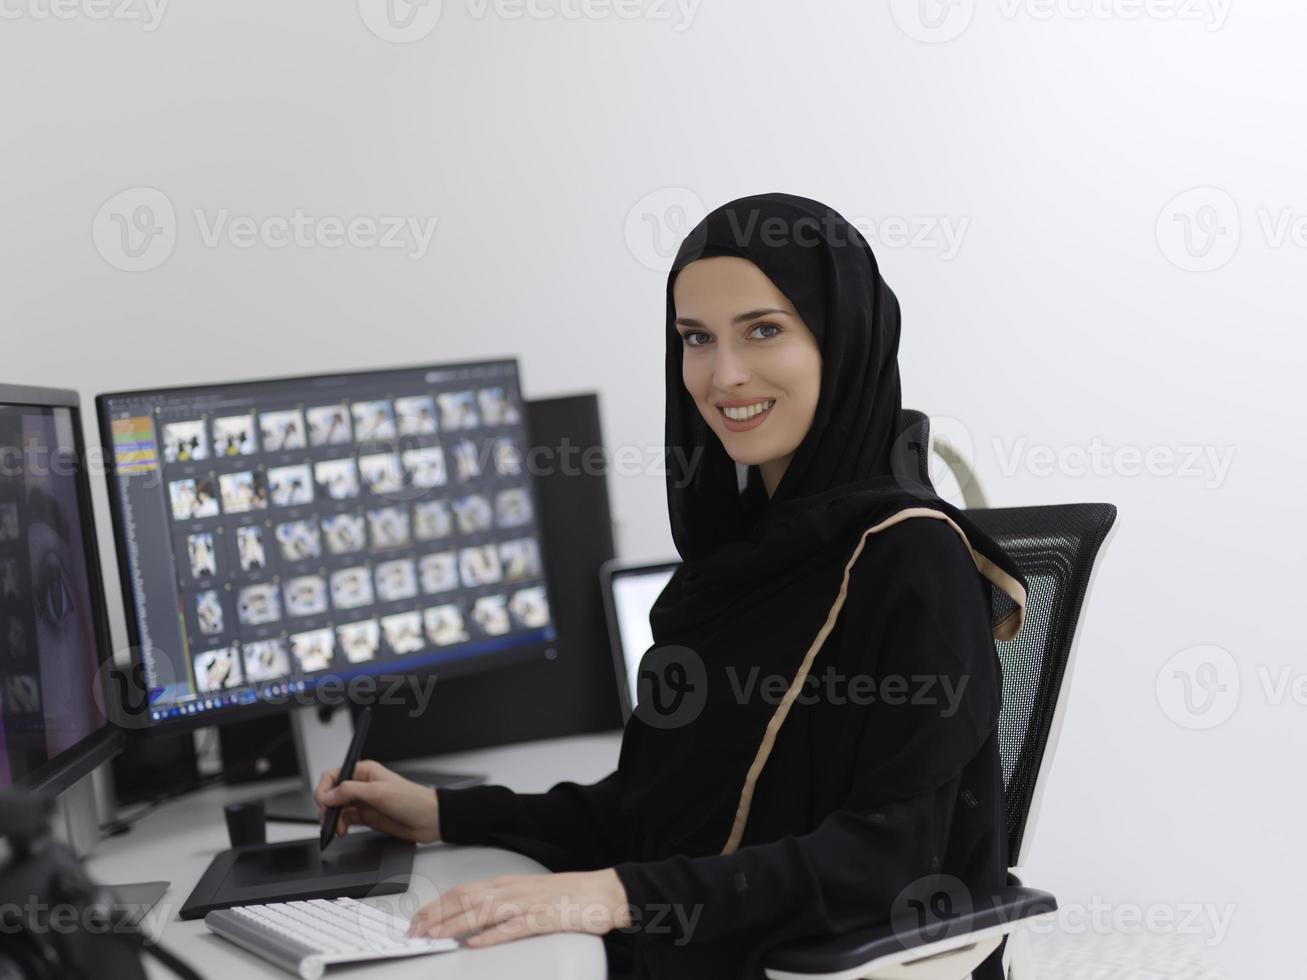 Muslim female graphic designer working on computer using graphic tablet and two monitors photo